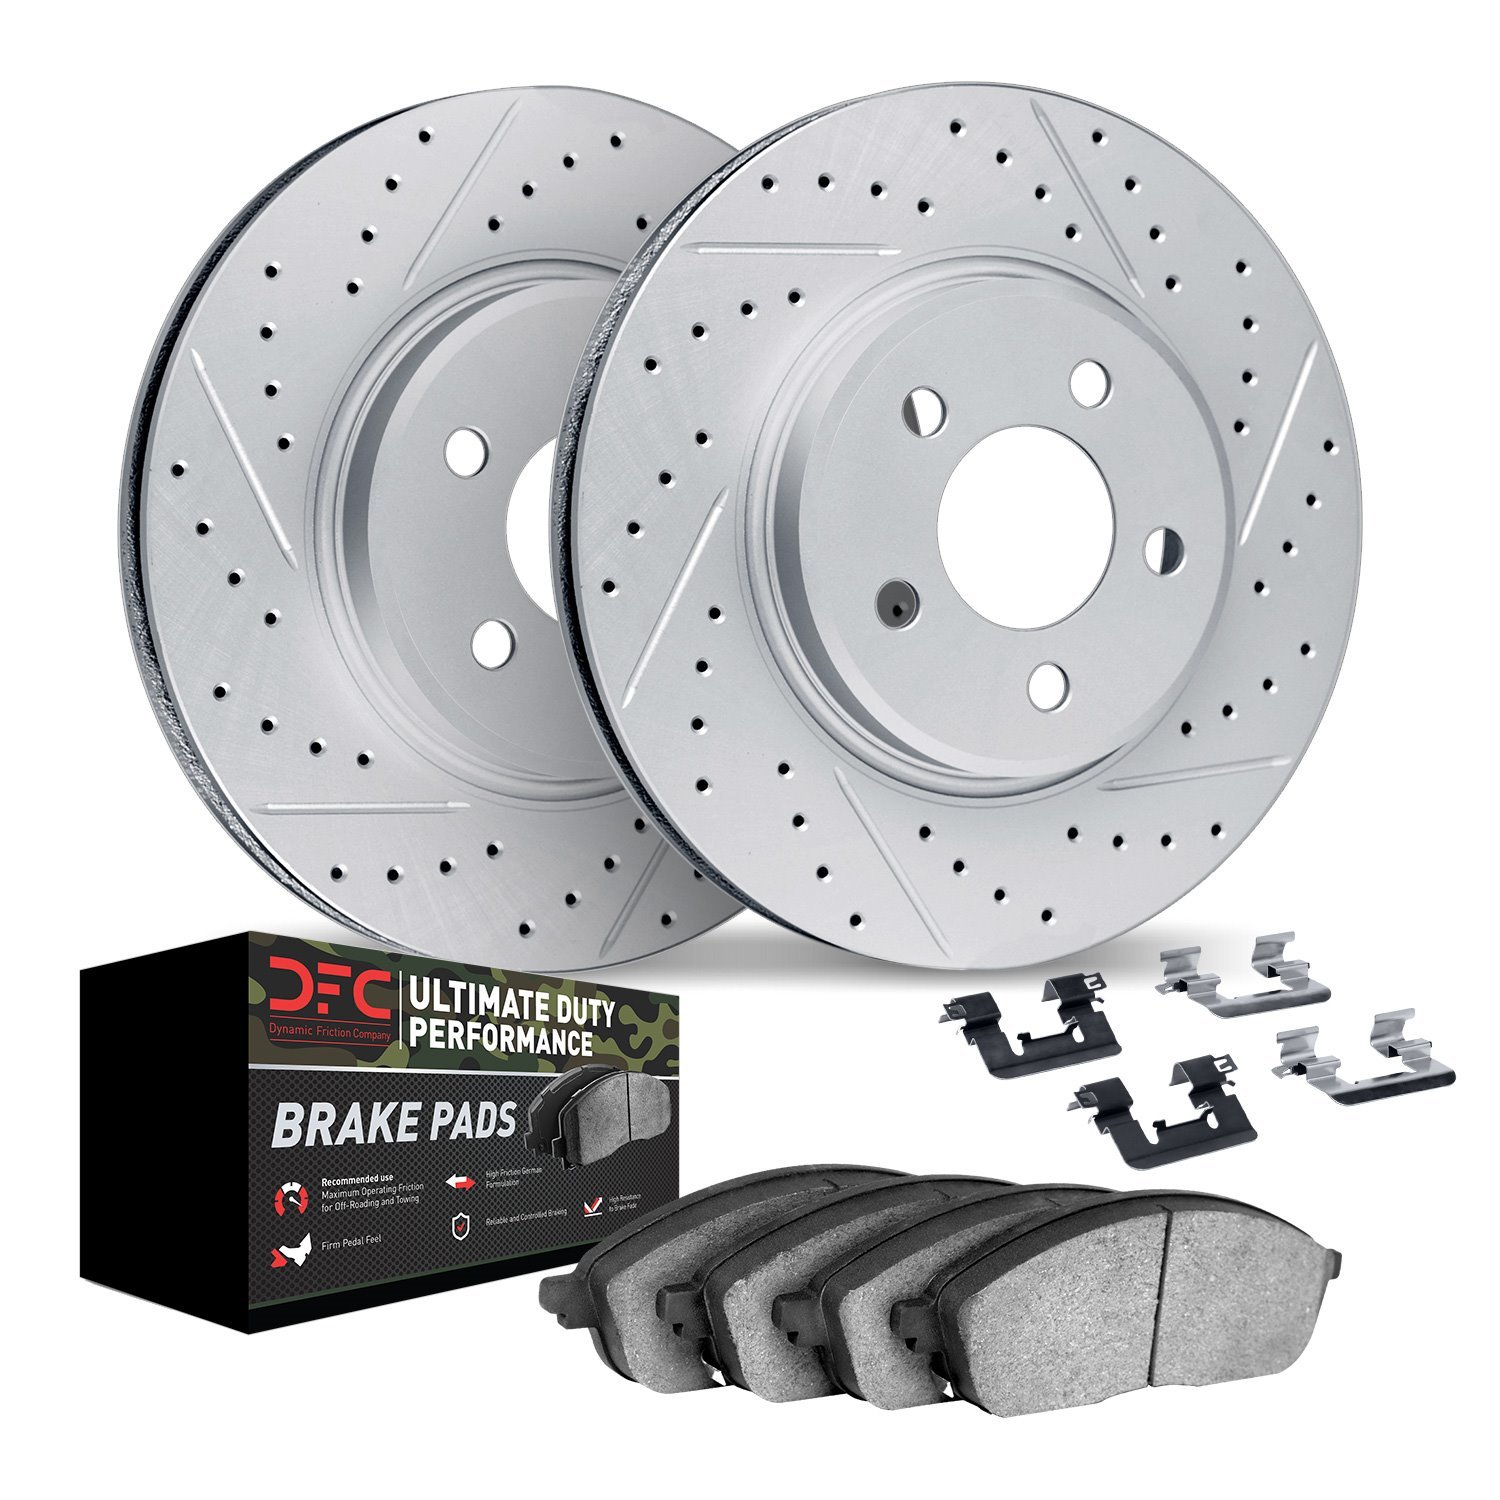 2412-54006 Geoperformance Drilled/Slotted Brake Rotors with Ultimate-Duty Brake Pads Kit & Hardware, 1983-1994 Ford/Lincoln/Merc